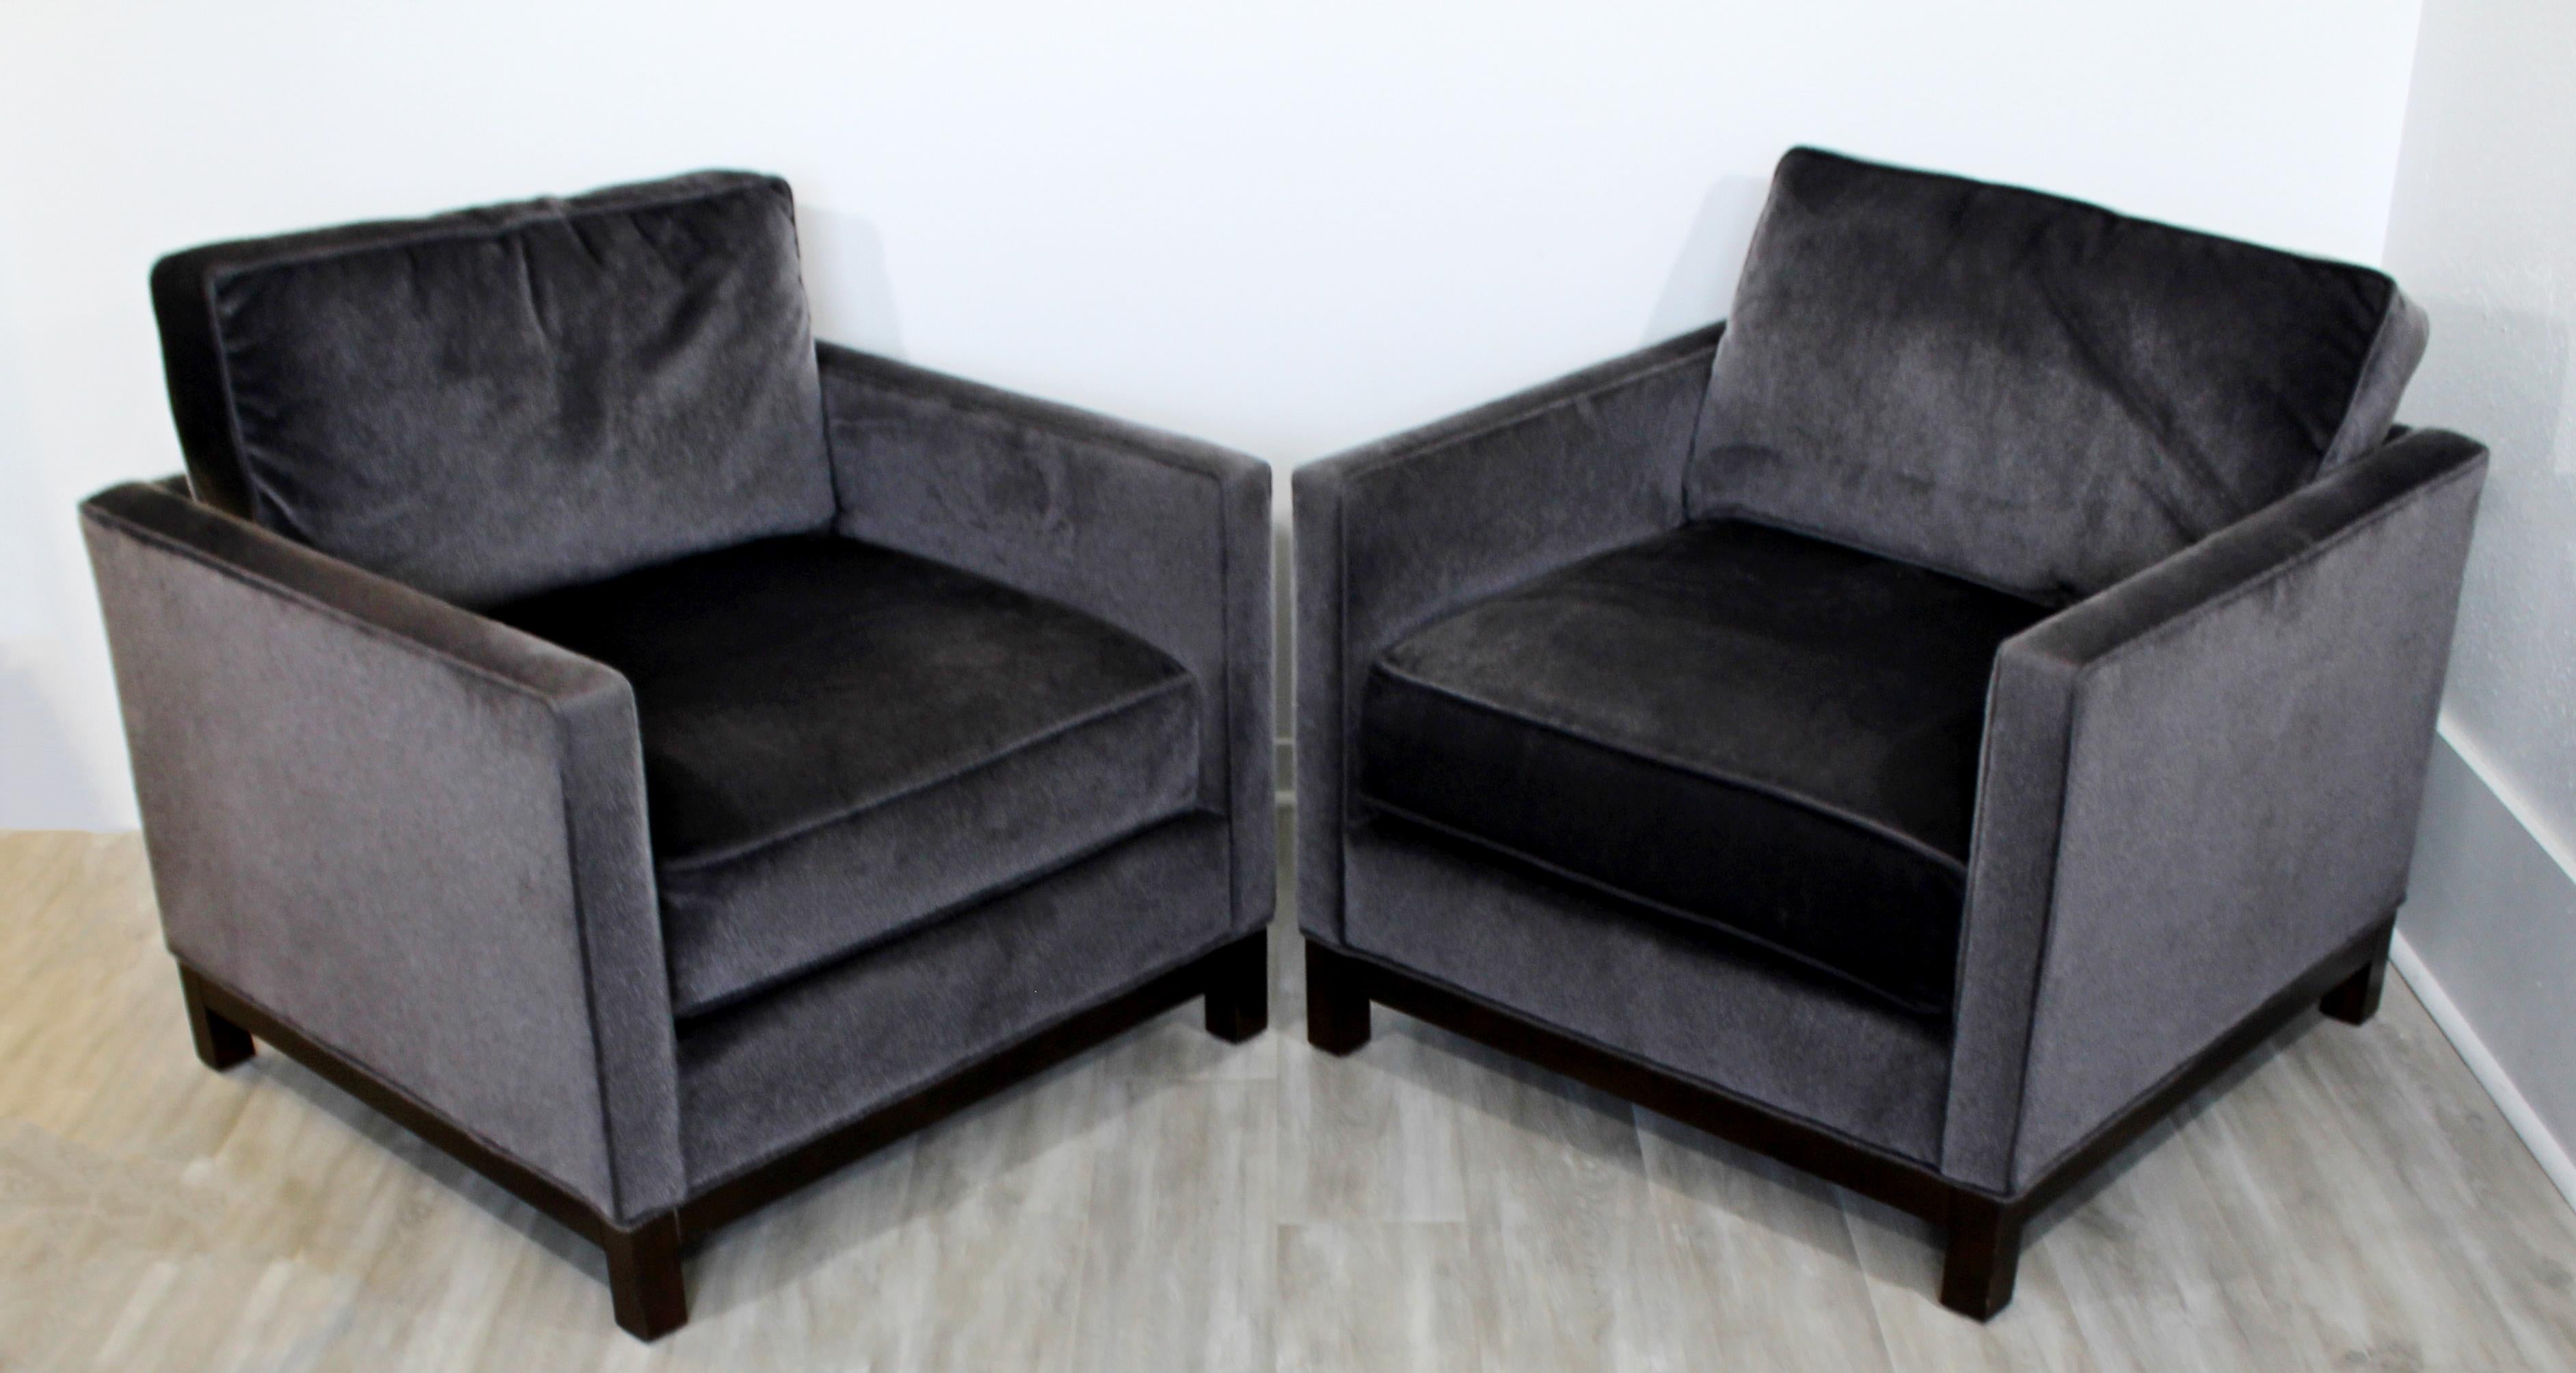 For your consideration is a magnificent pair of massive cube lounge armchairs, with faux mohair upholstery and on wooden bases, by Lexington. In excellent condition. The dimensions are 35